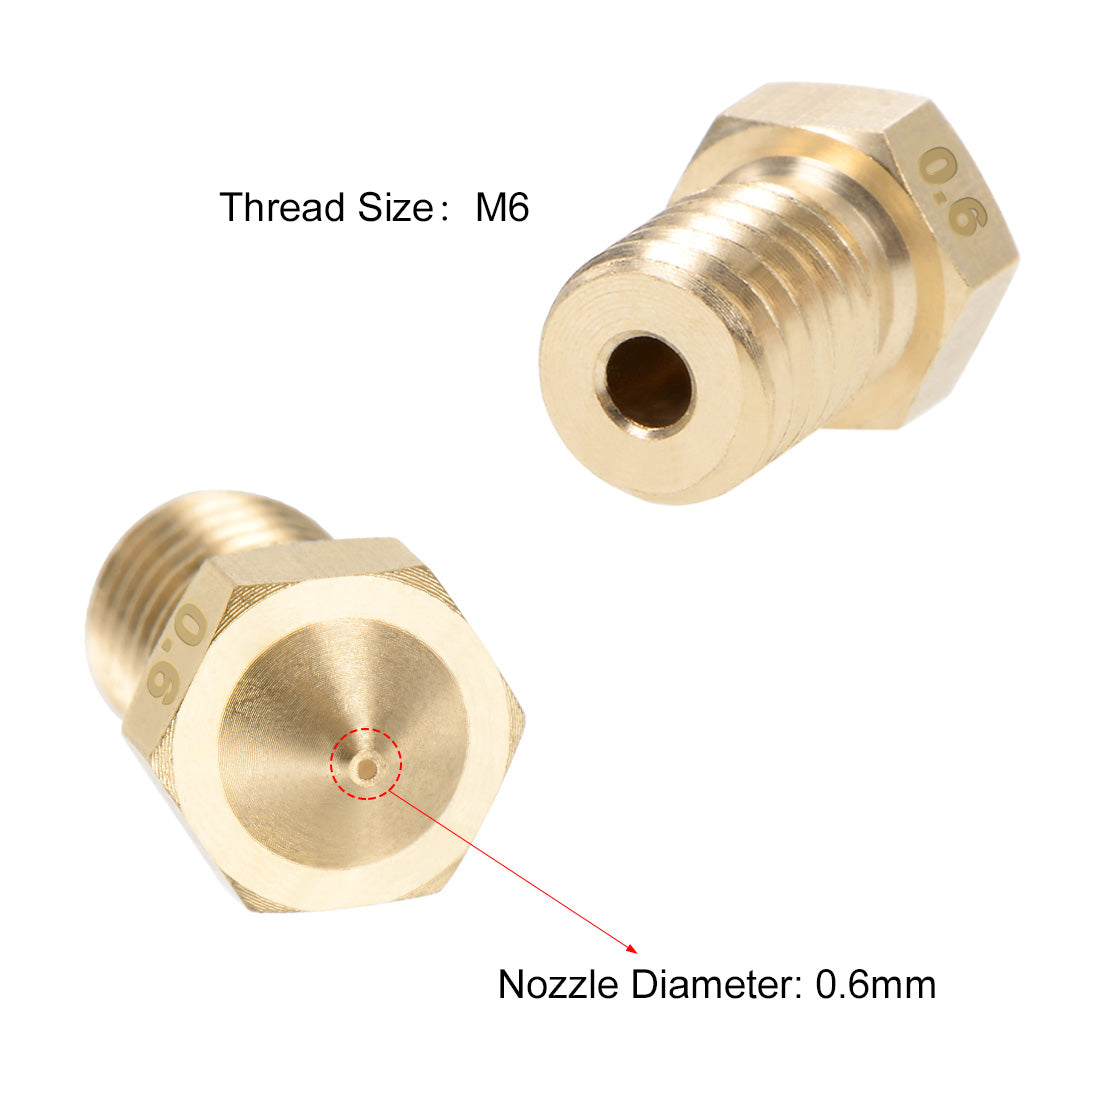 uxcell Uxcell 0.6mm 3D Printer Nozzle Head M6 for V5 V6 1.75mm Extruder Print, Brass 5pcs